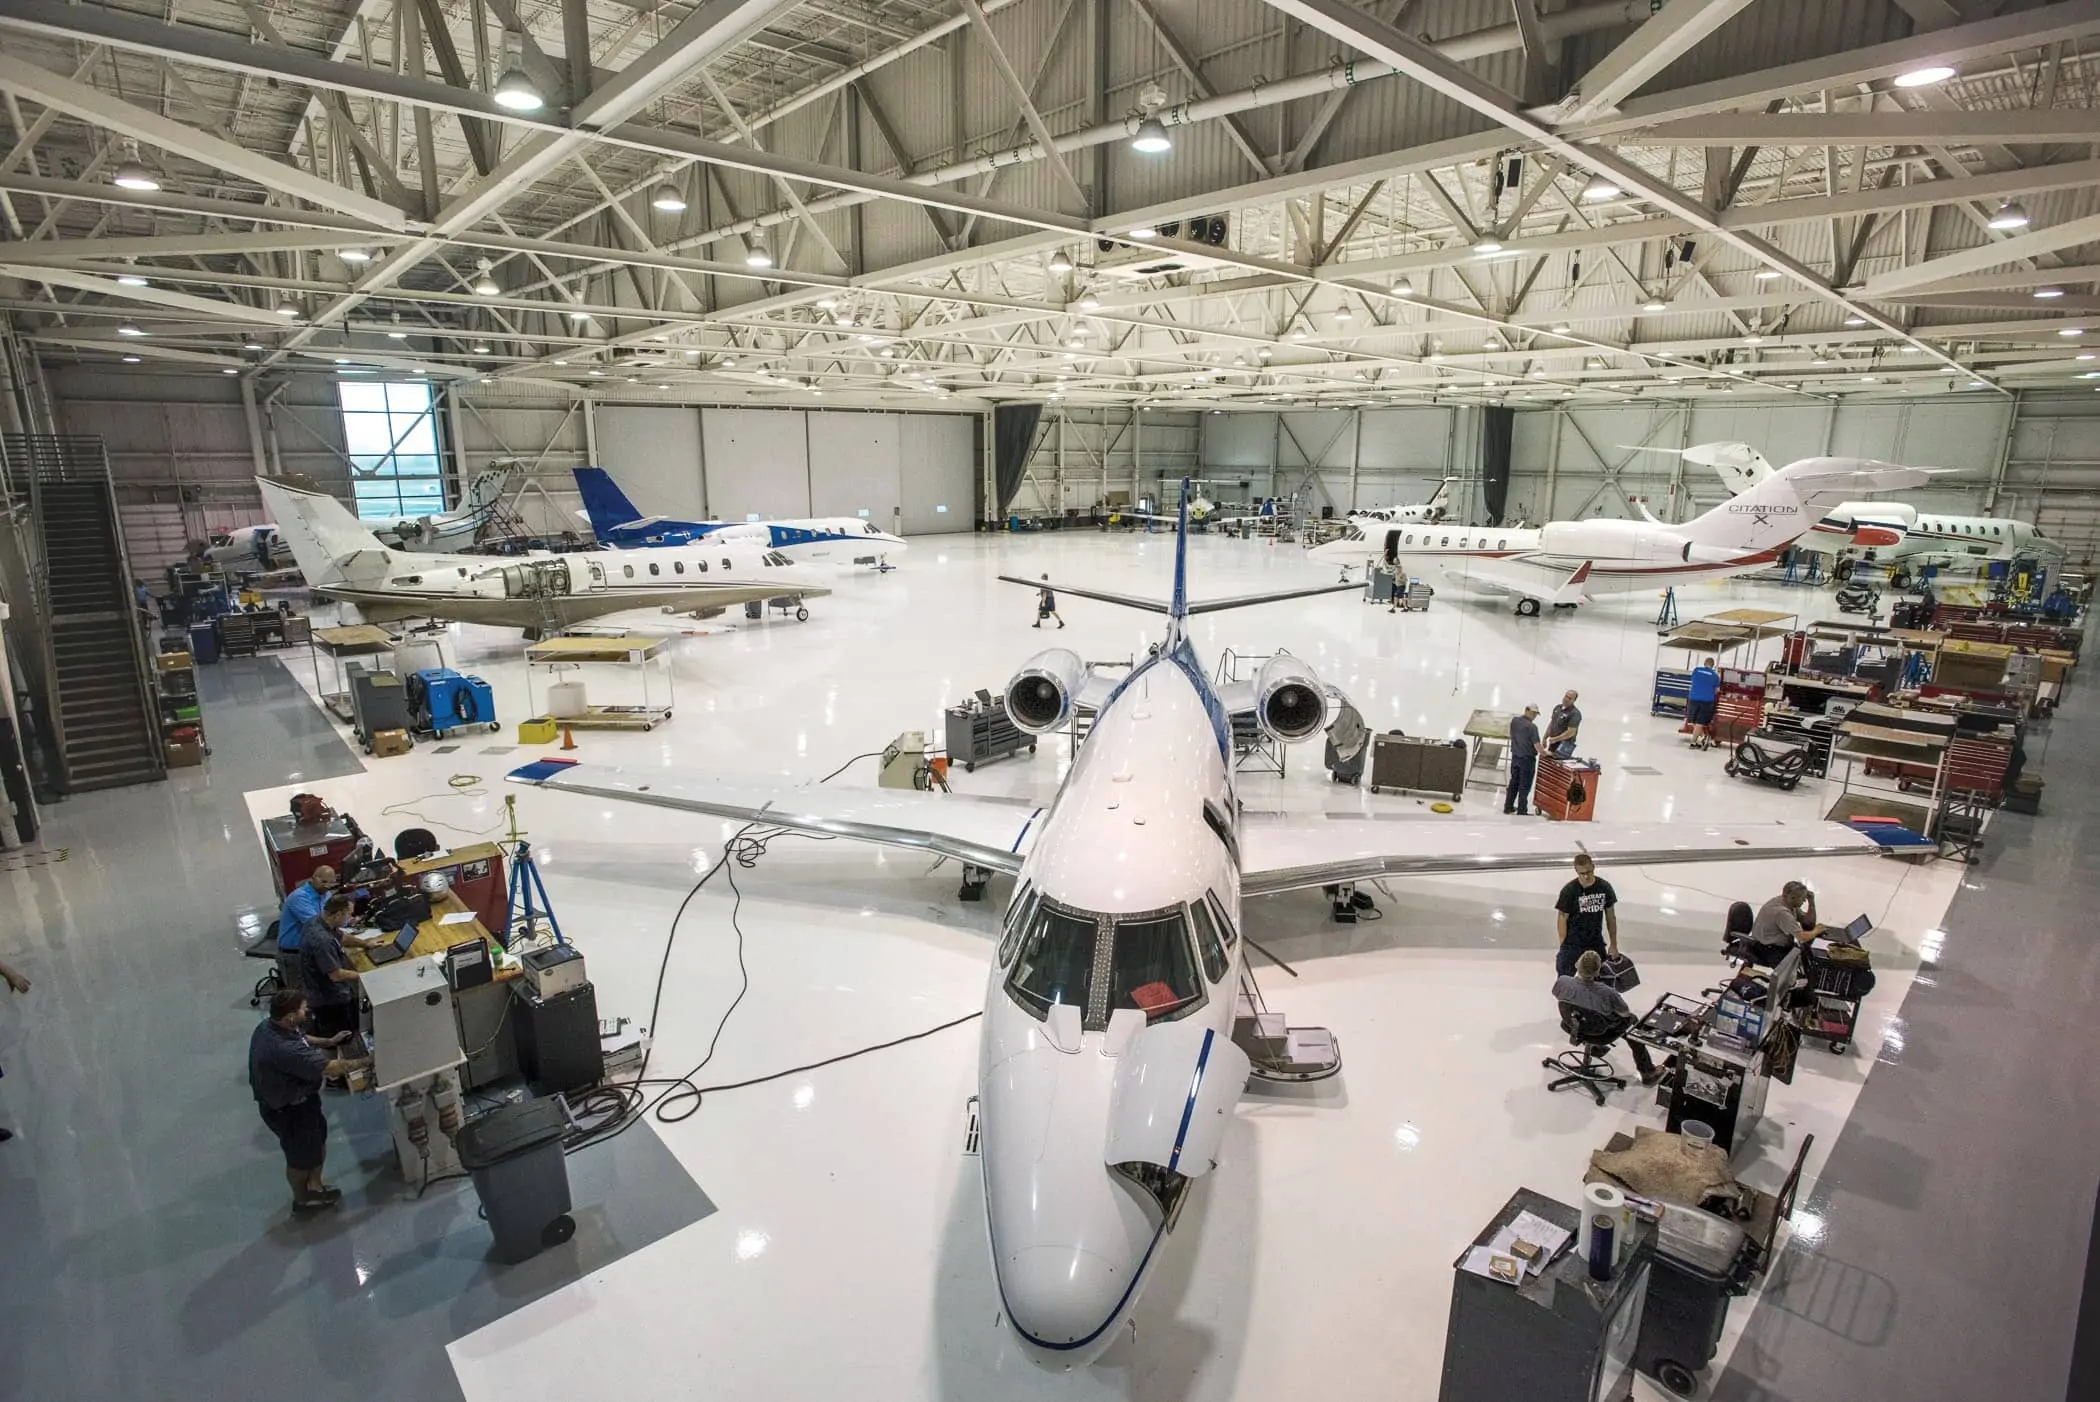 Cessna citation maintenance hangar - are private jets safer than commercial